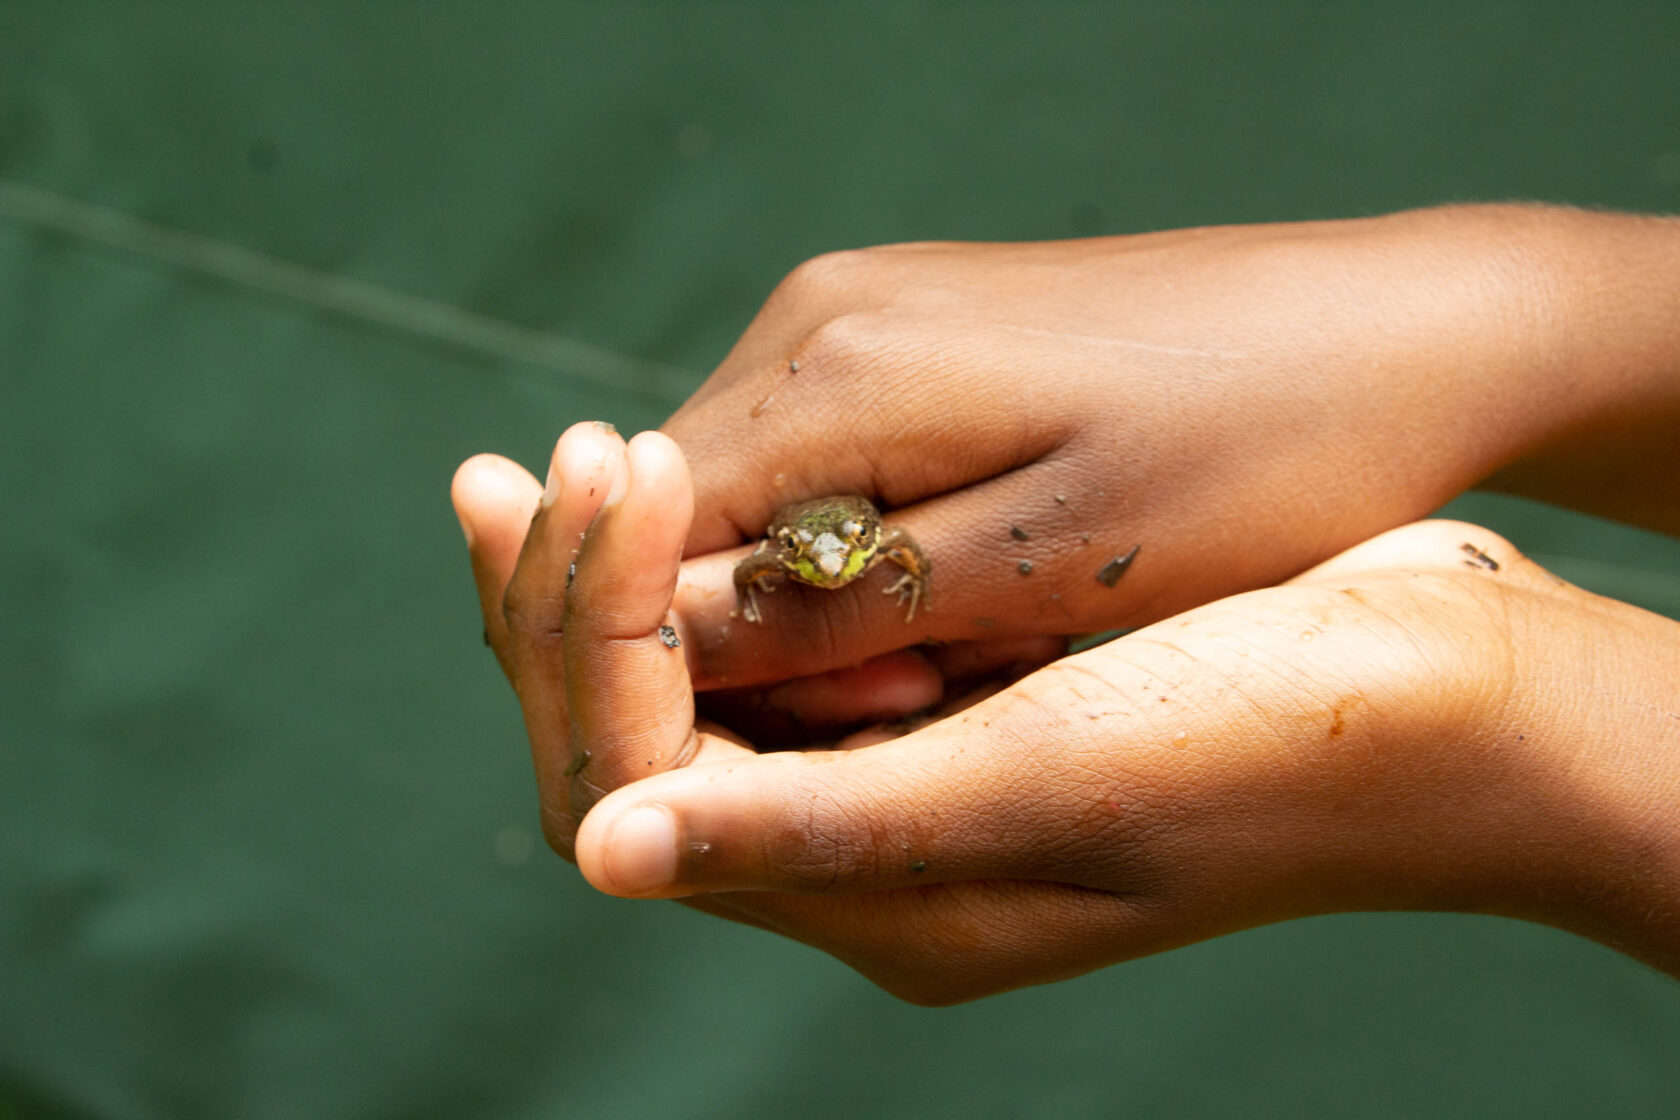 Hands cupping a small frog.